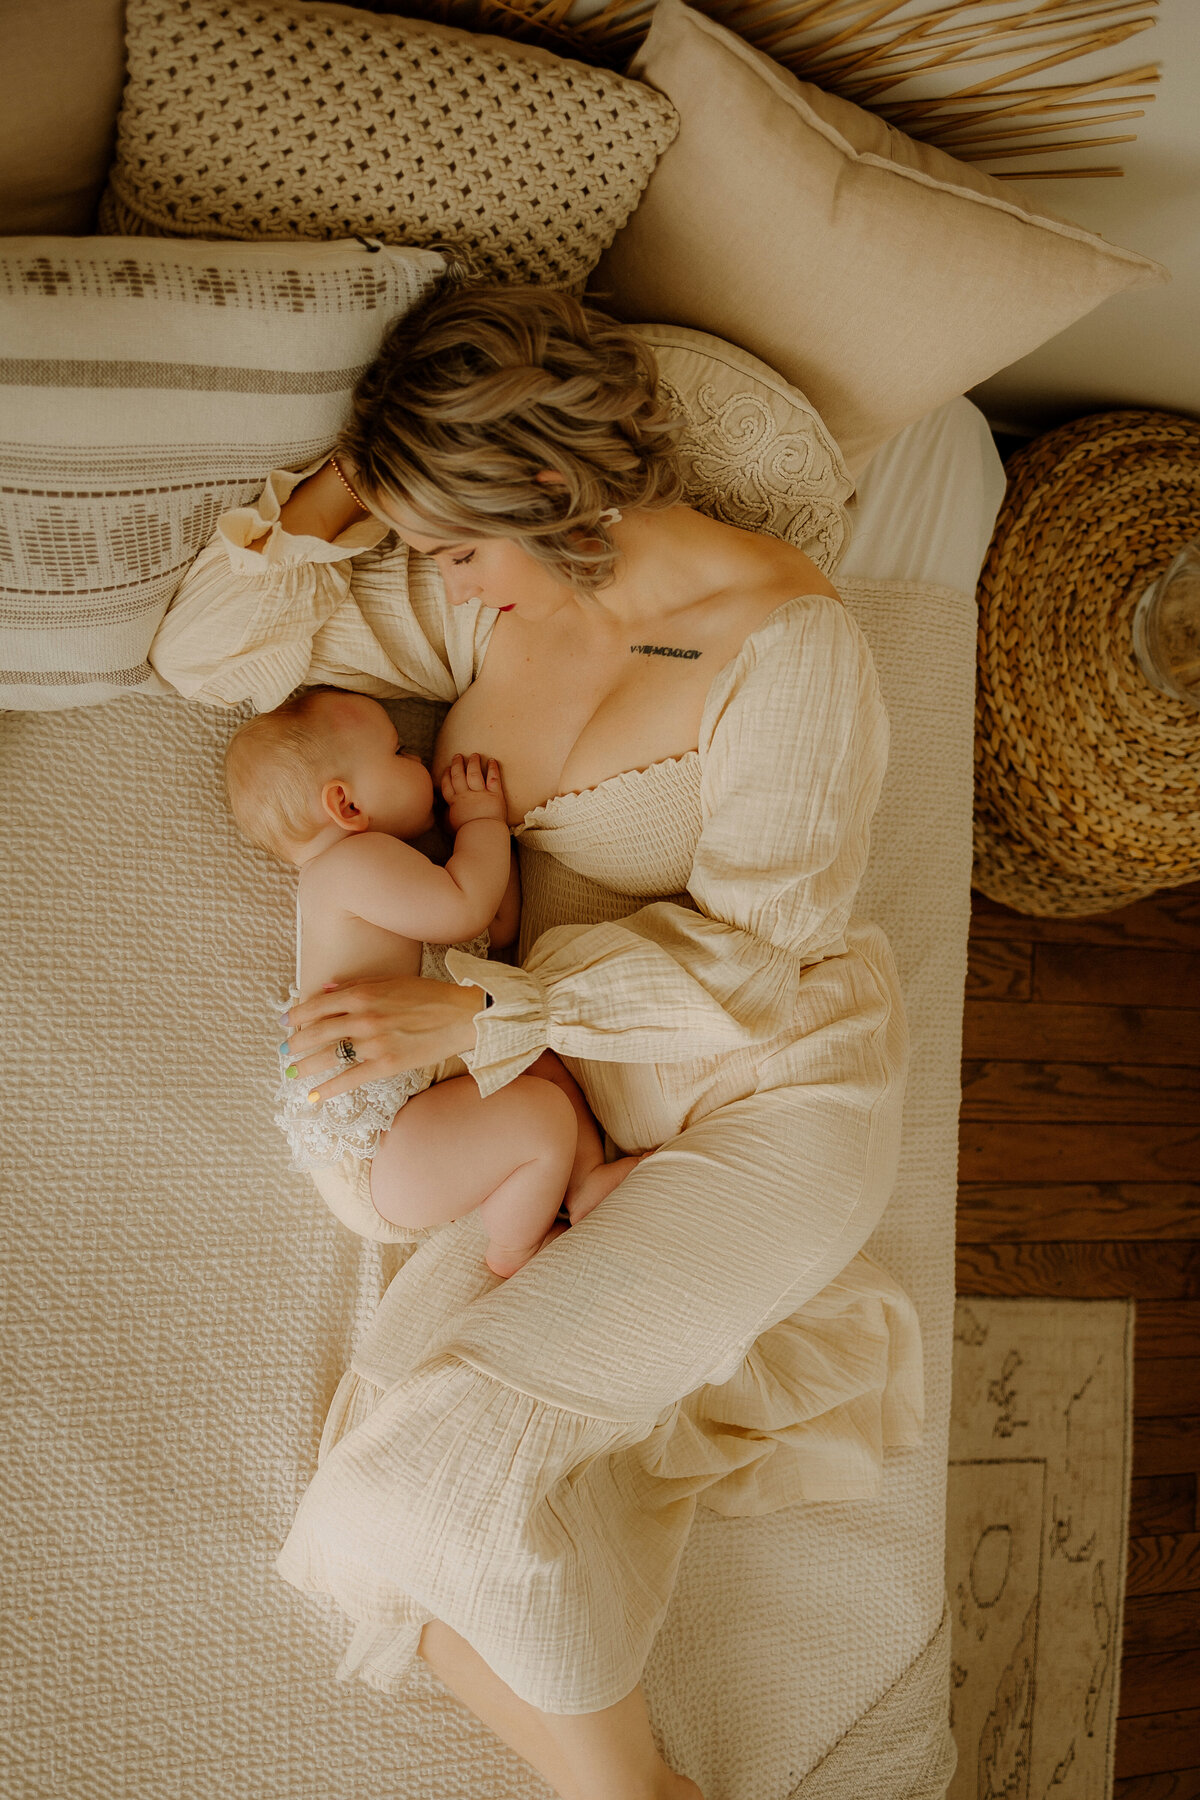 Step into the world of family moments captured with warmth and authenticity. Haley Skof Photography's portfolio tells the story of the bonds that matter most.